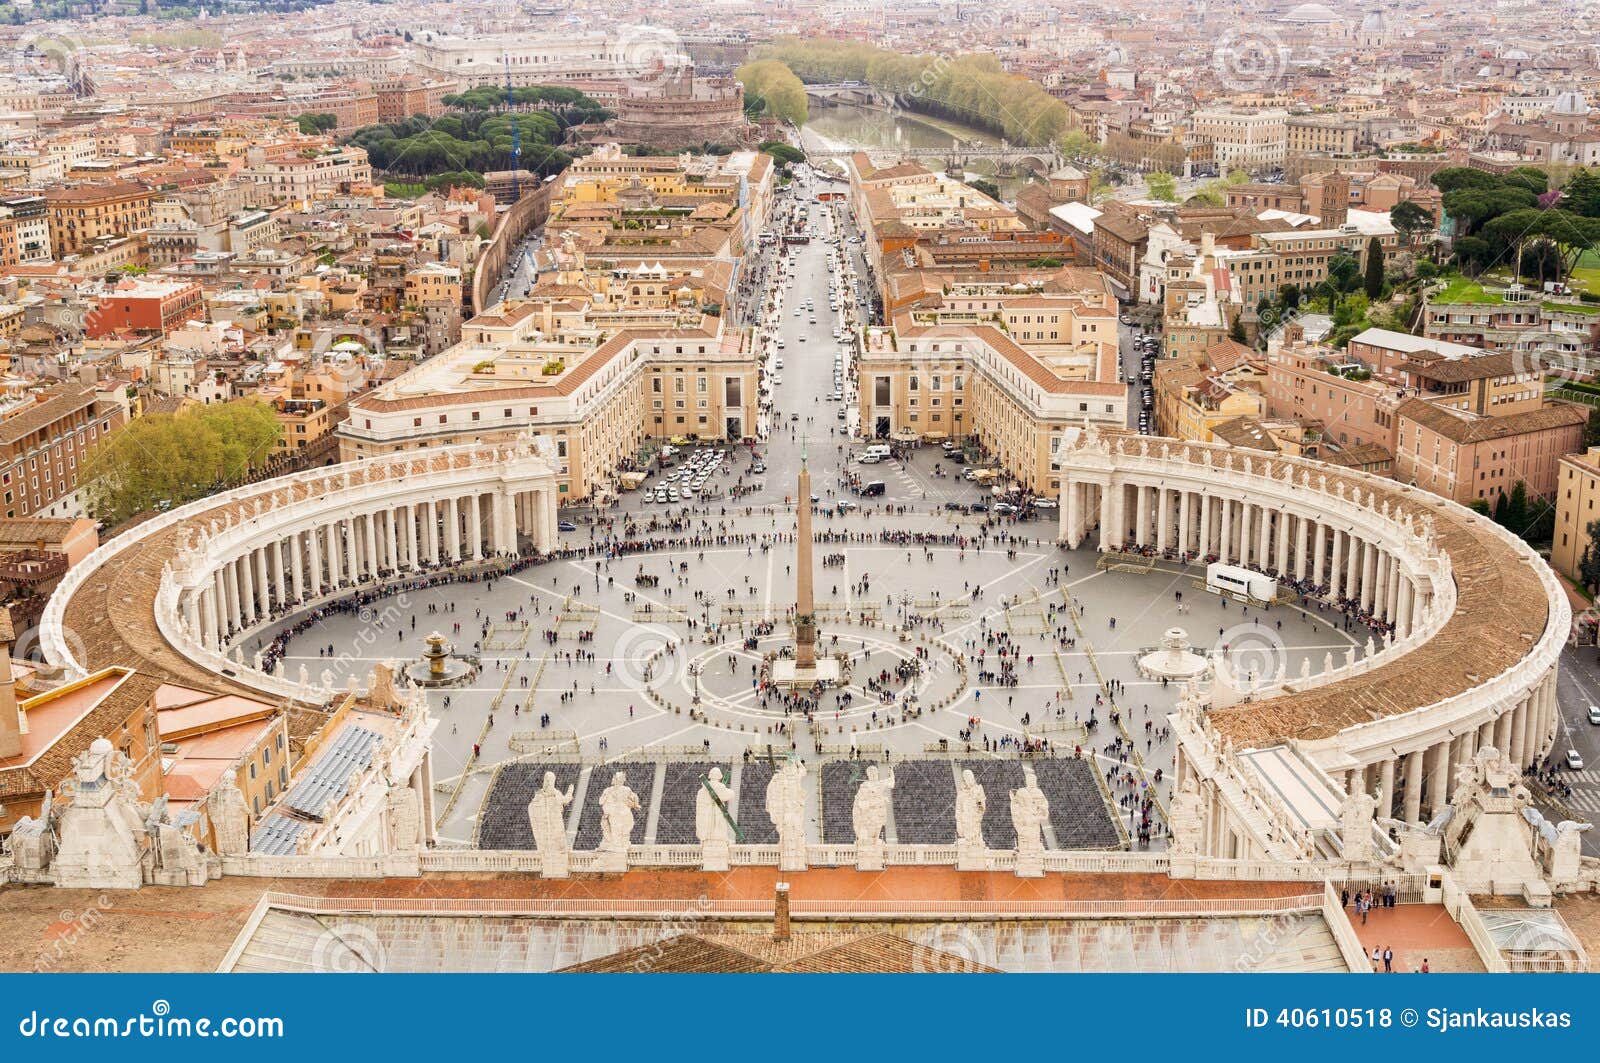 st. peters square, vatican aerial view